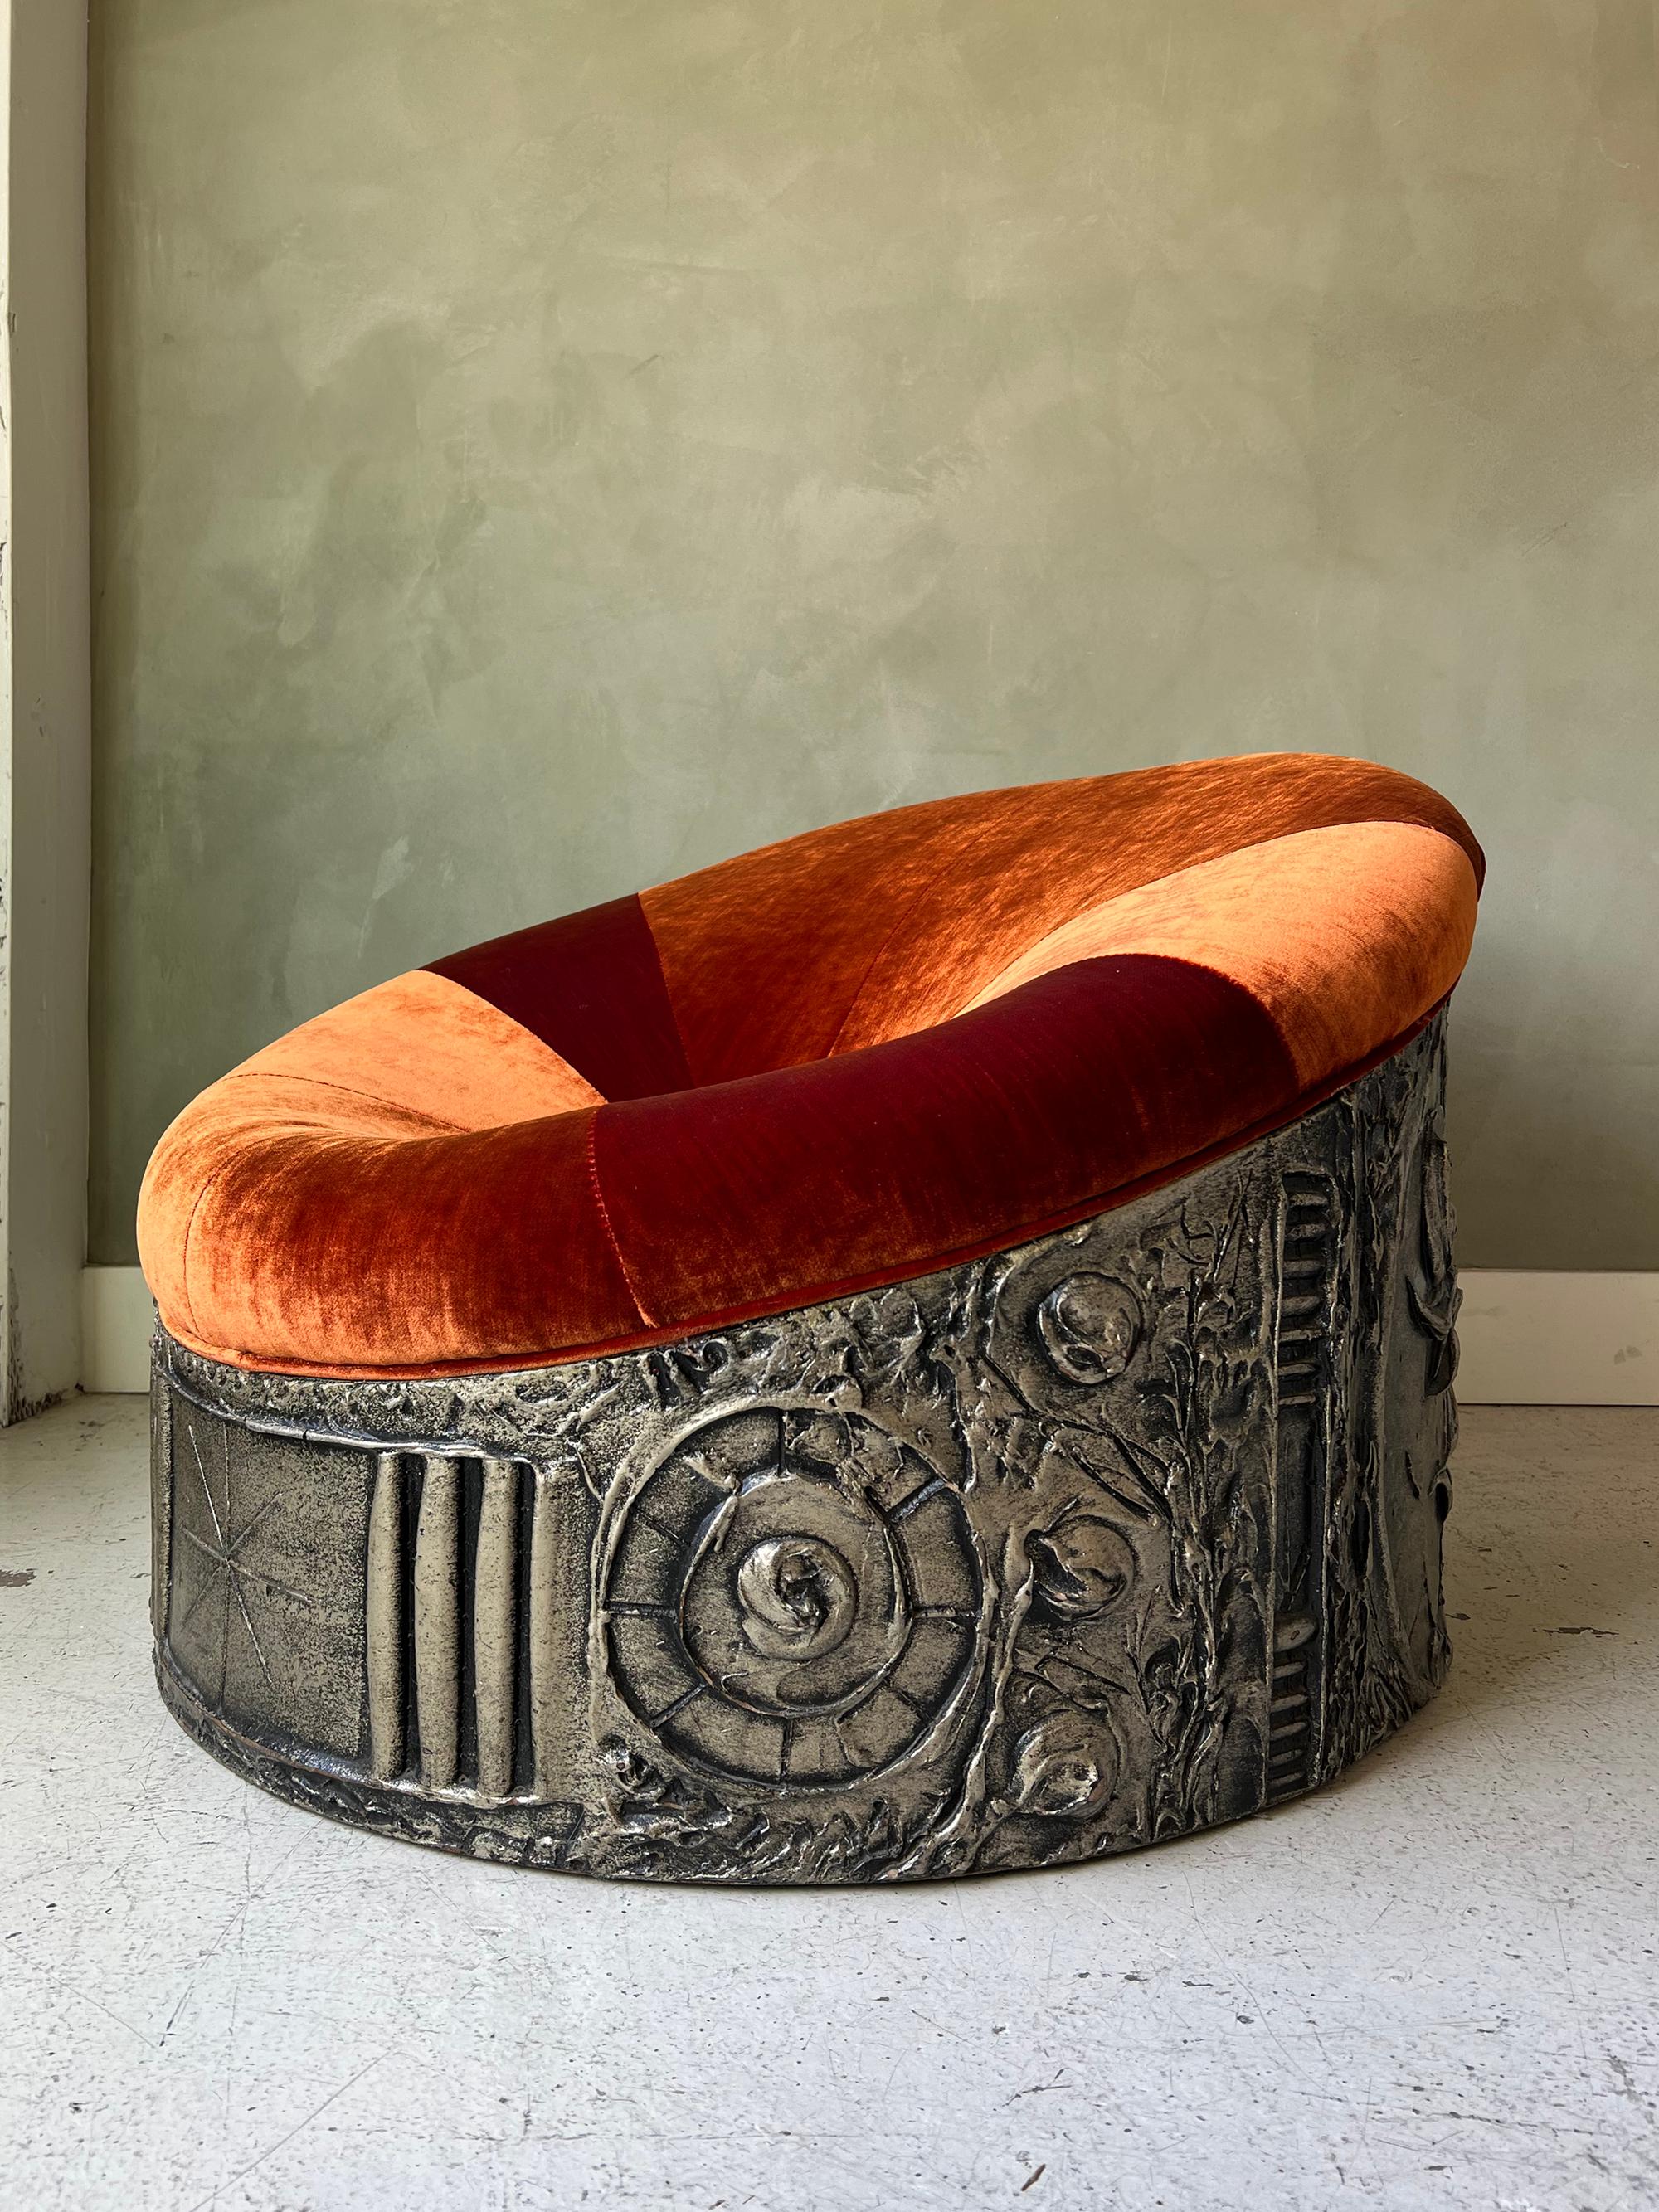 Occasional chair design by Adrian Pearsall for Craft Associates. Burnt orange velvet upholstery and new foam/padding. Nice firm support and ready for lounging.